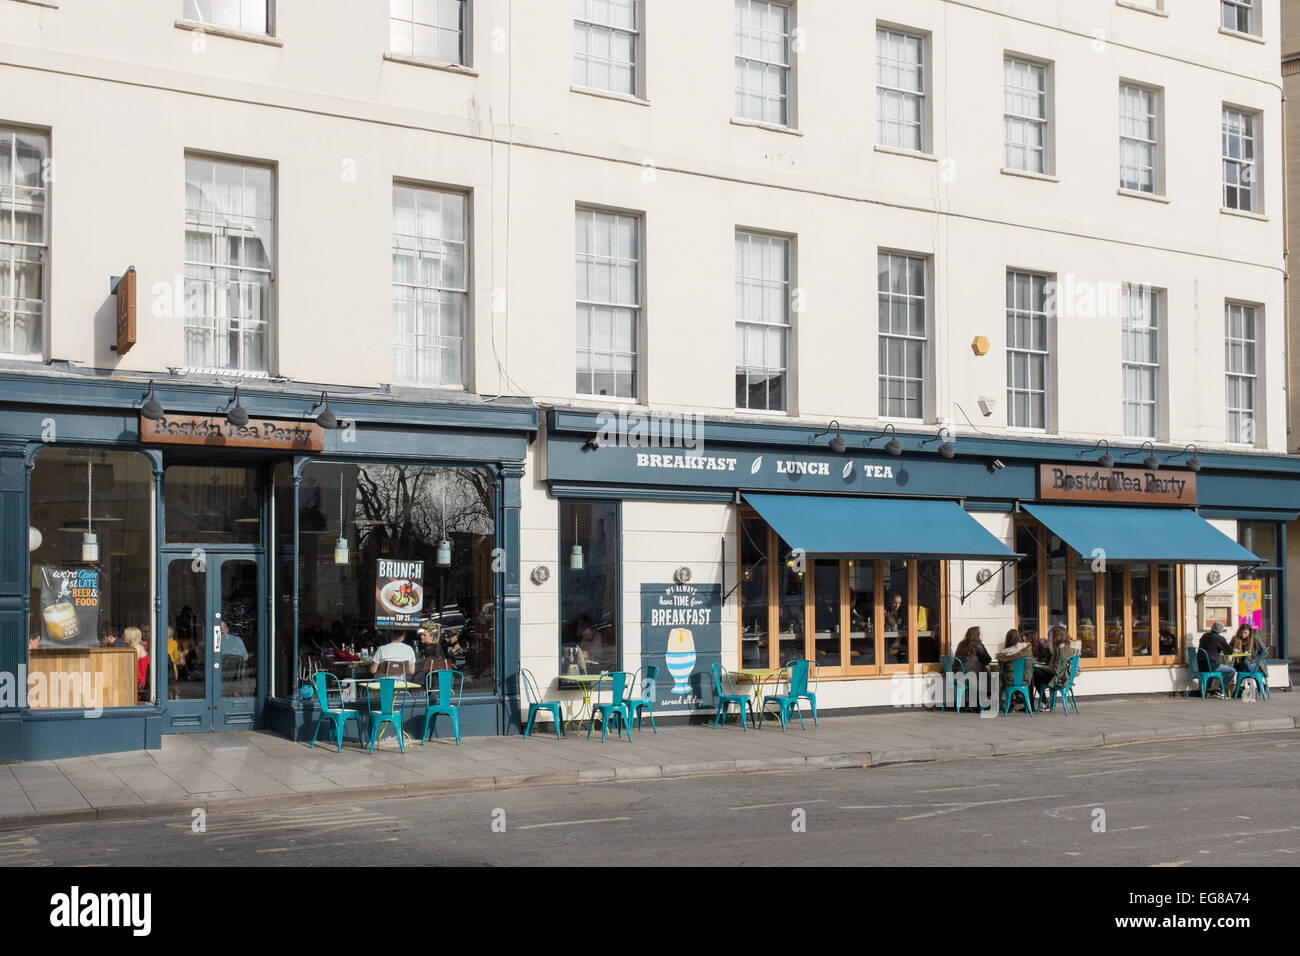 Boston Tea Party coffee shop and diner on Cheltenham, Gloucestershire Stock Photo